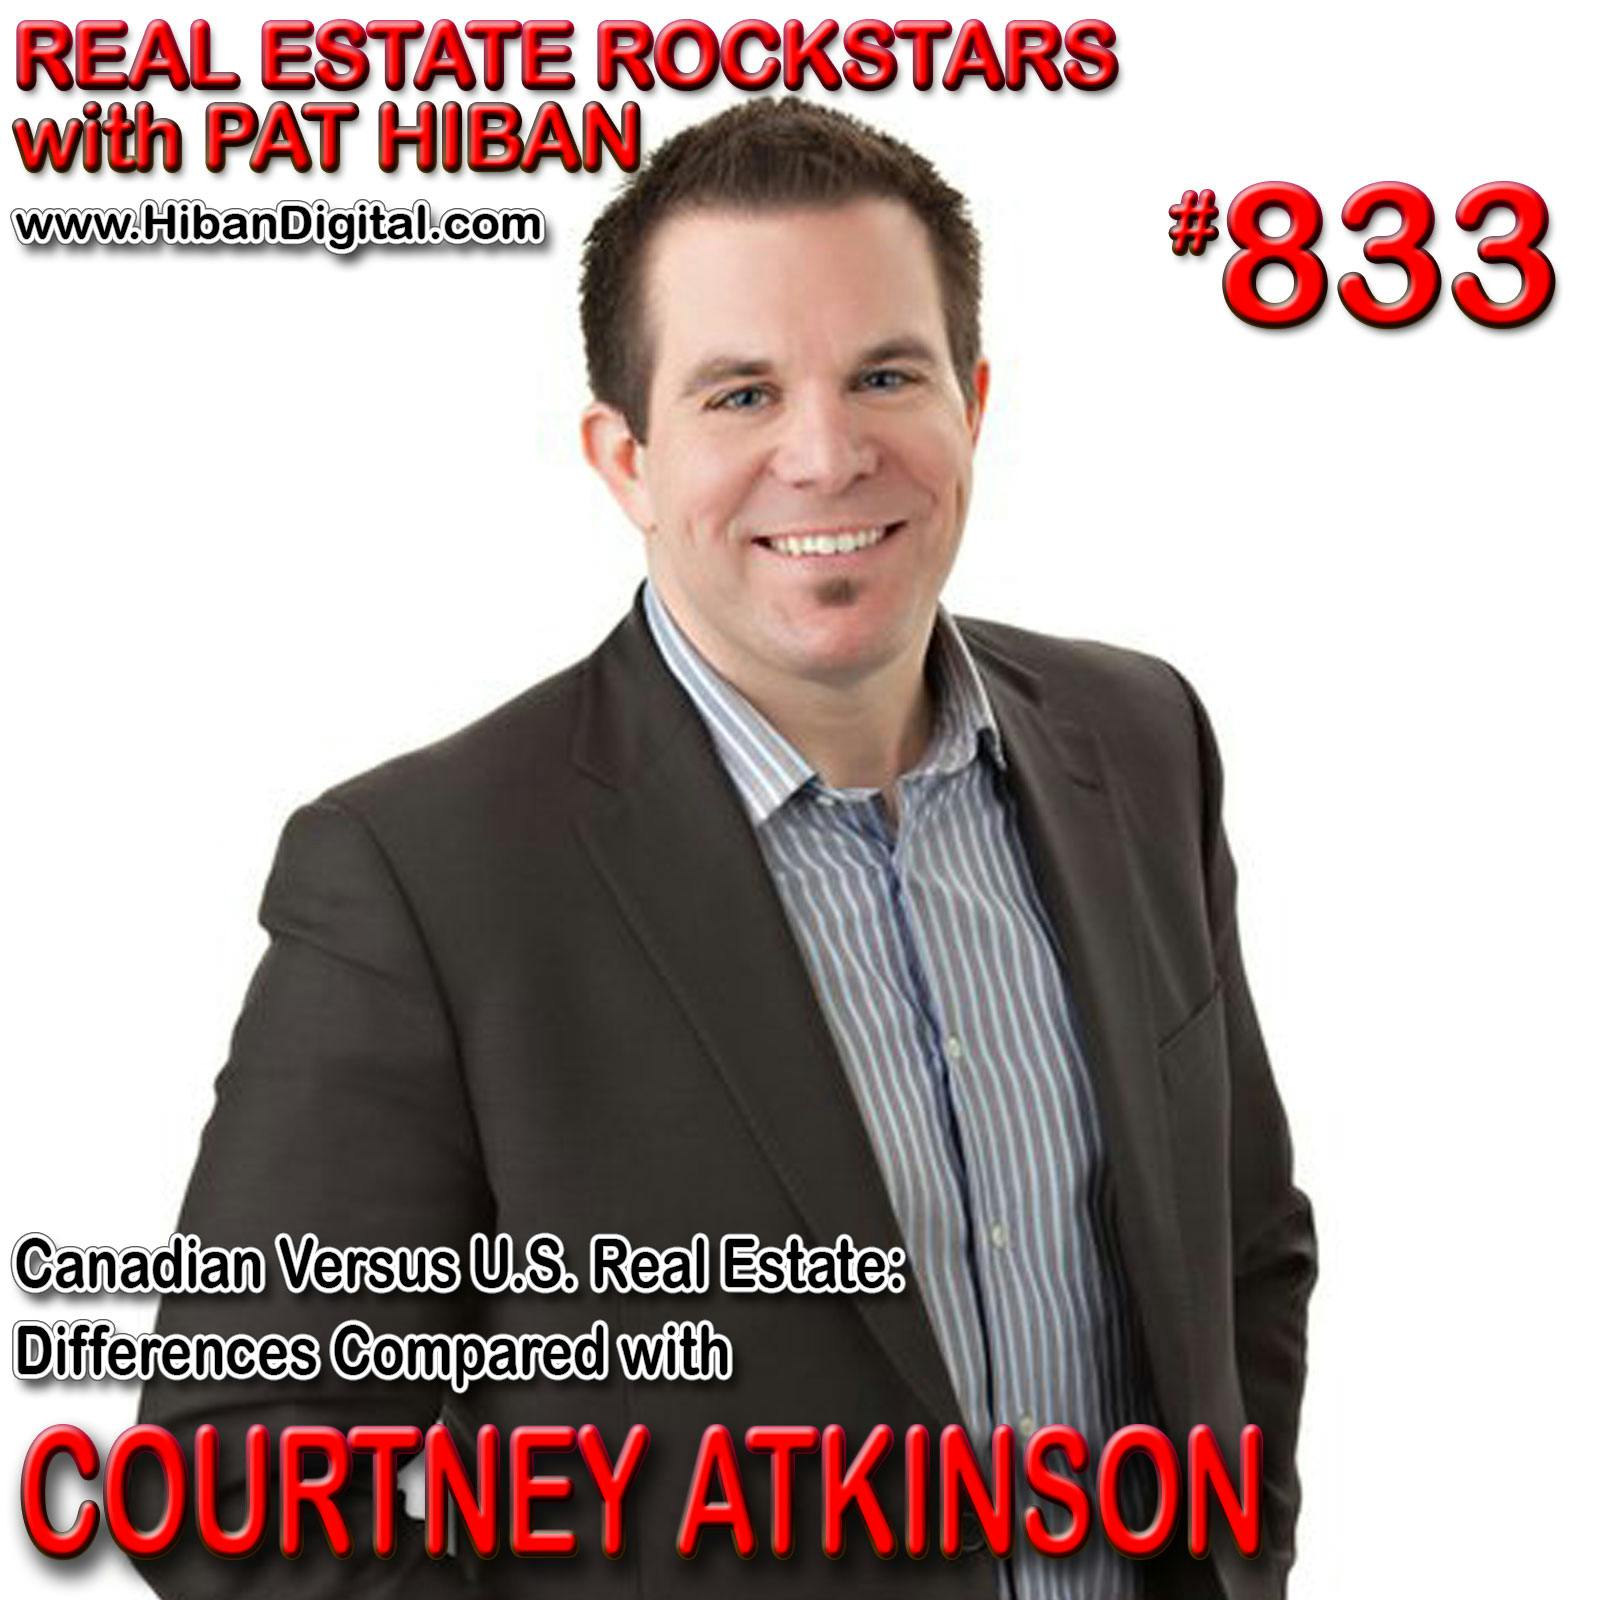 833: Canadian Versus U.S. Real Estate: Differences Compared with Courtney Atkinson